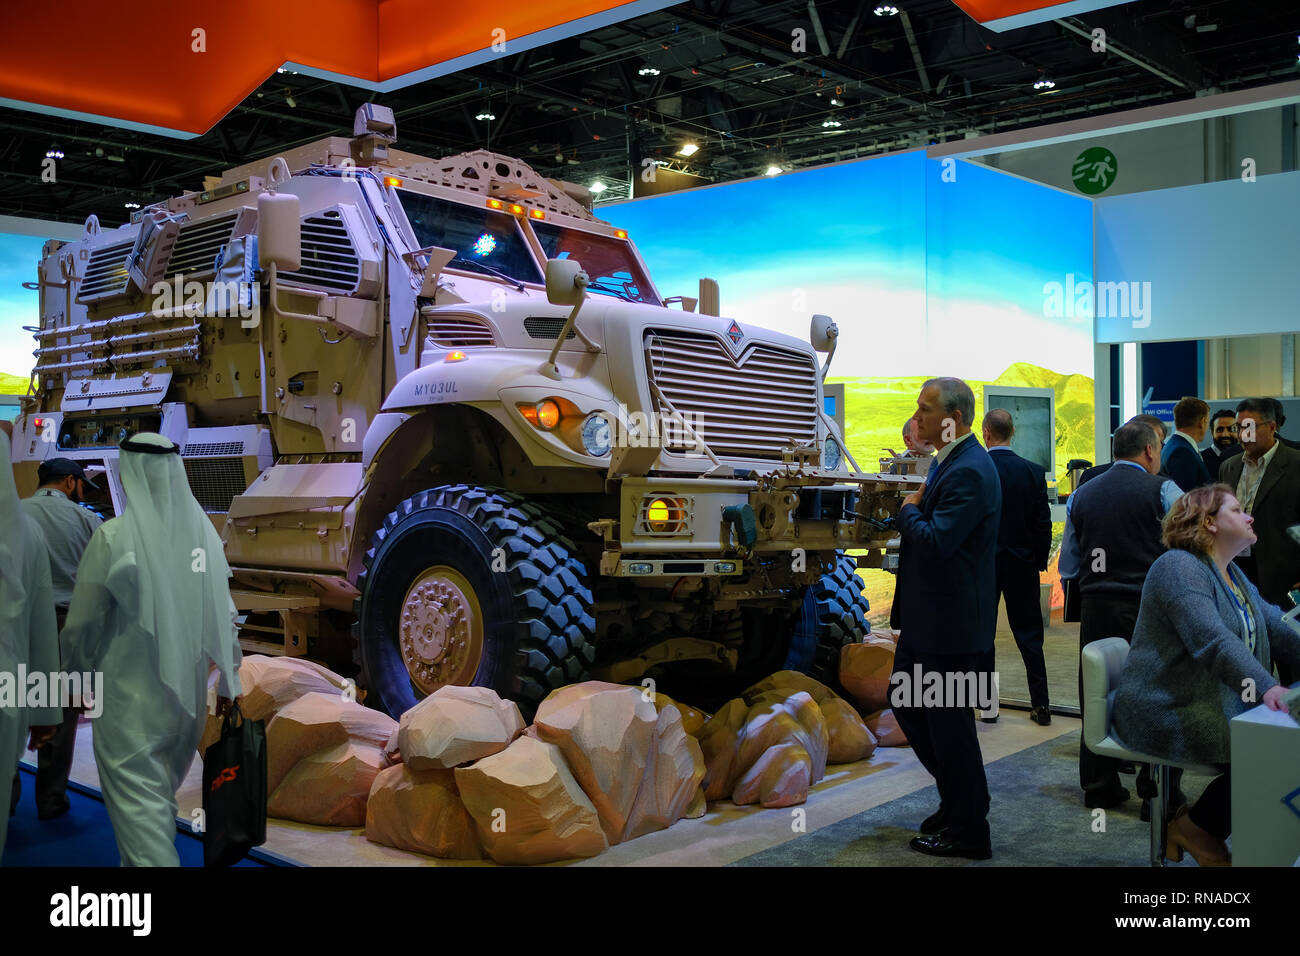 Abu Dhabi, UAE. 18th Feb 2019. IDEX 2019 is being held in ADNEC Abu Dhabi, UAE. IDEX is the only international defence exhibition and conference in the MENA region demonstrating the latest technology across land, sea and air sectors of defence. Credit: Fahd Khan / Live News Alamy Stock Photo